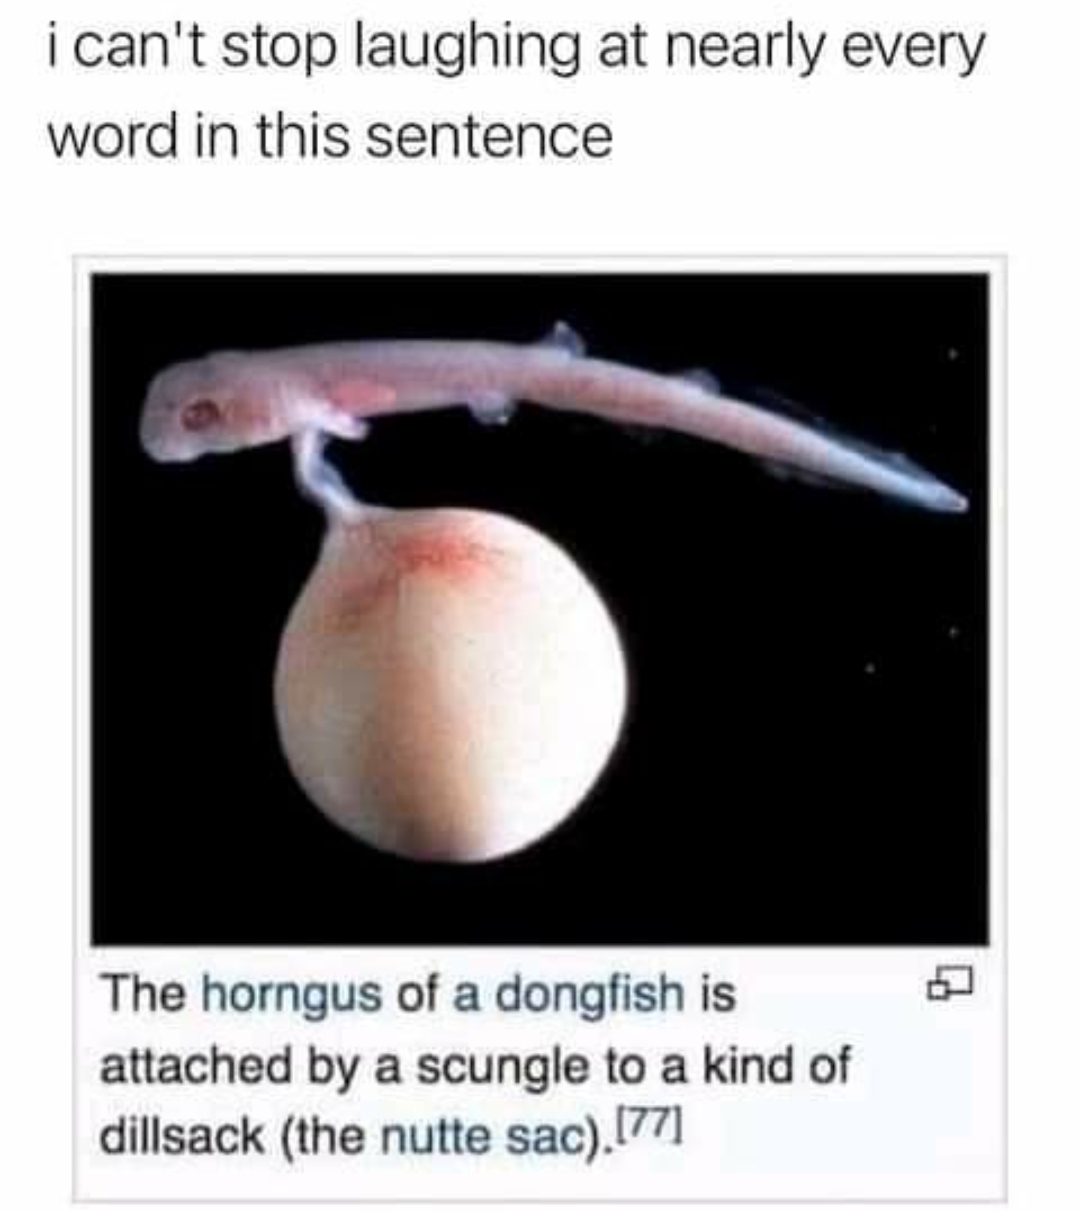 funny memes - nutte sac - i can't stop laughing at nearly every word in this sentence The horngus of a dongfish is attached by a scungle to a kind of dillsack the nutte sac.77